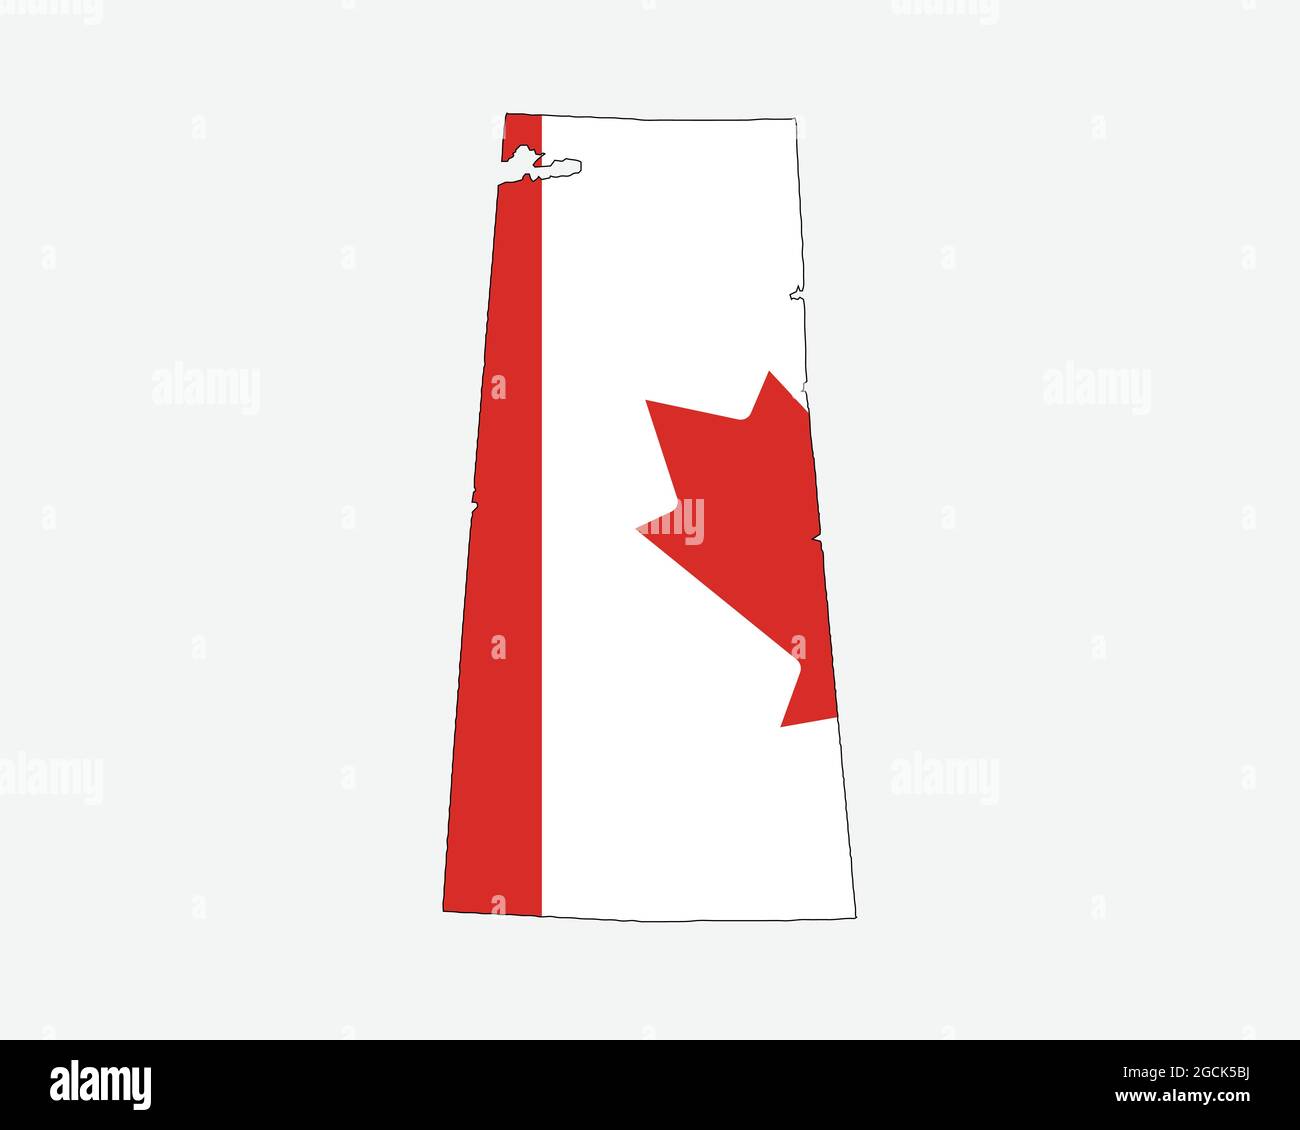 Saskatchewan Map on Canadian Flag. SK, CA Province Map on Canada Flag. EPS Vector Graphic Clipart Icon Stock Vector